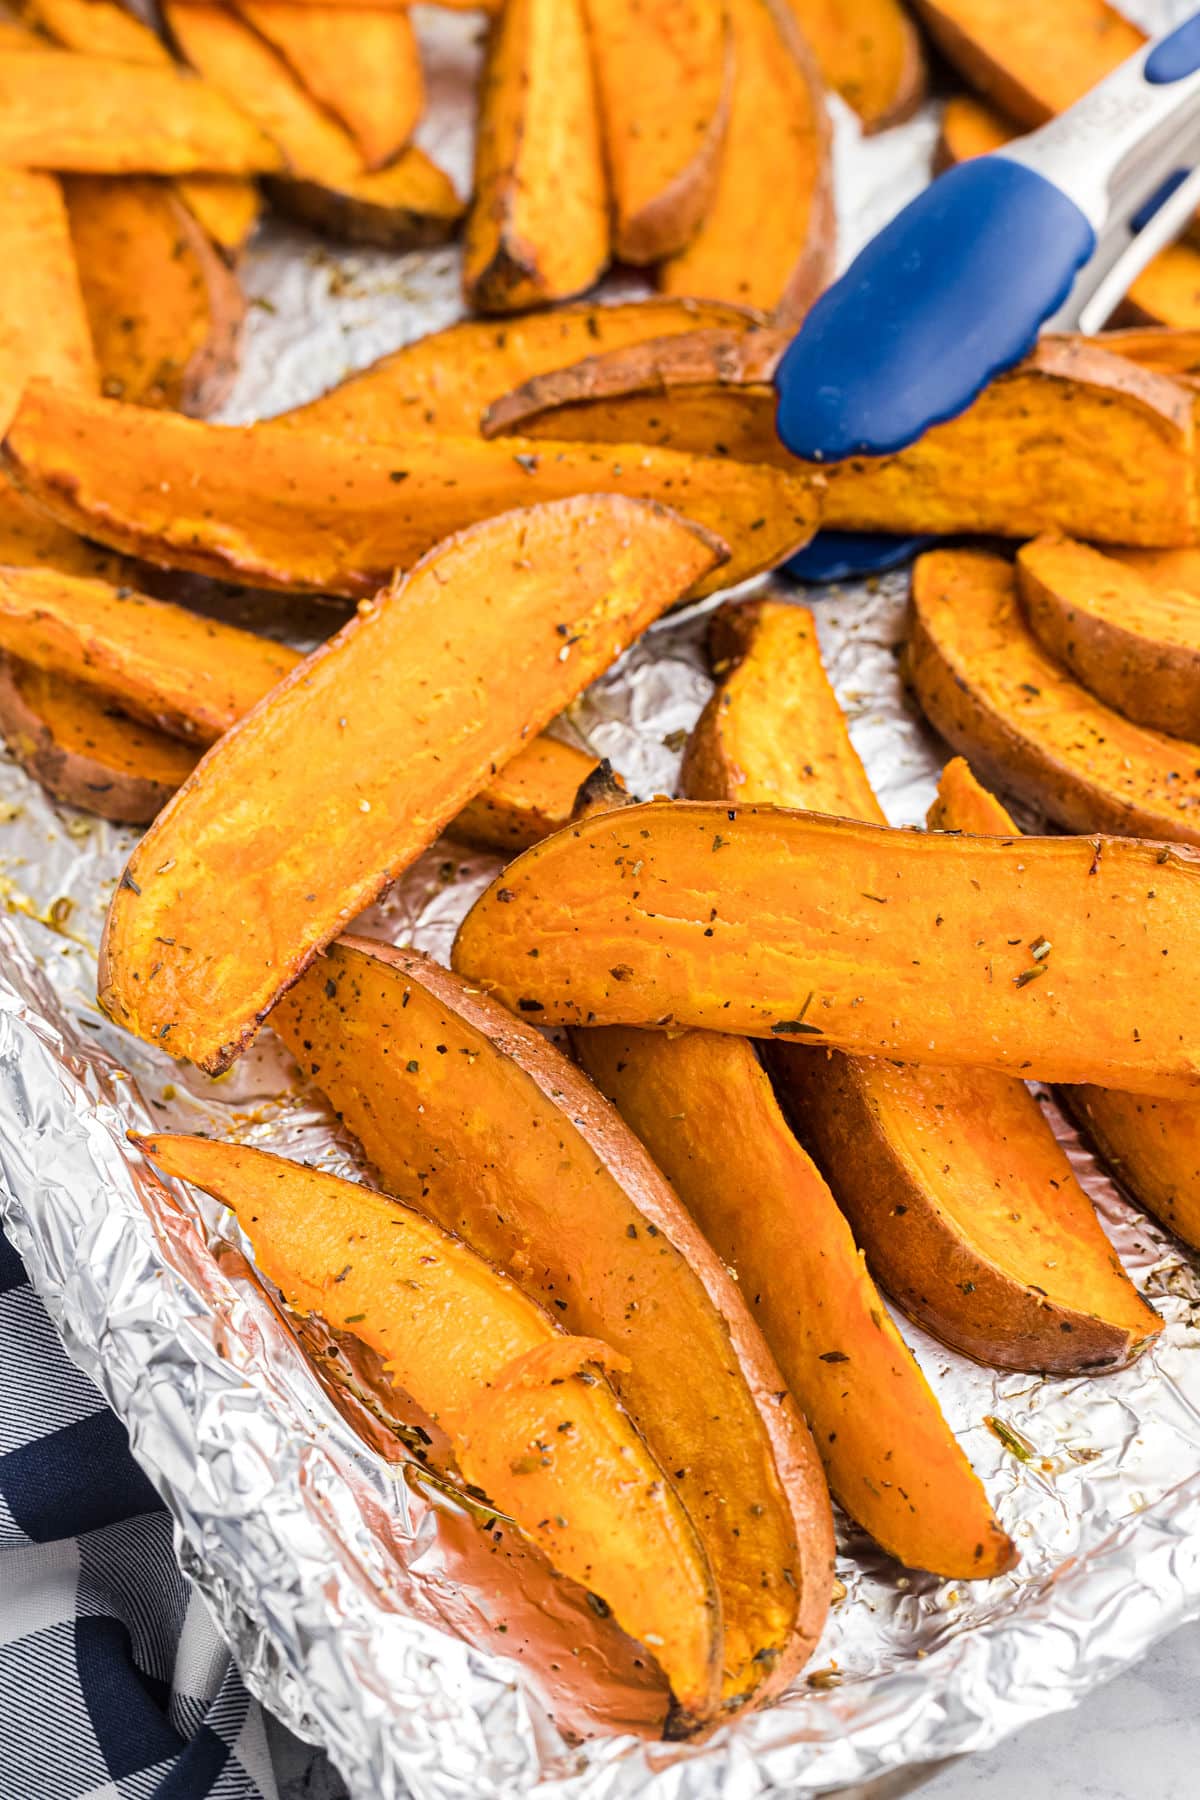 potato wedges on a sheet pan lined with foil.